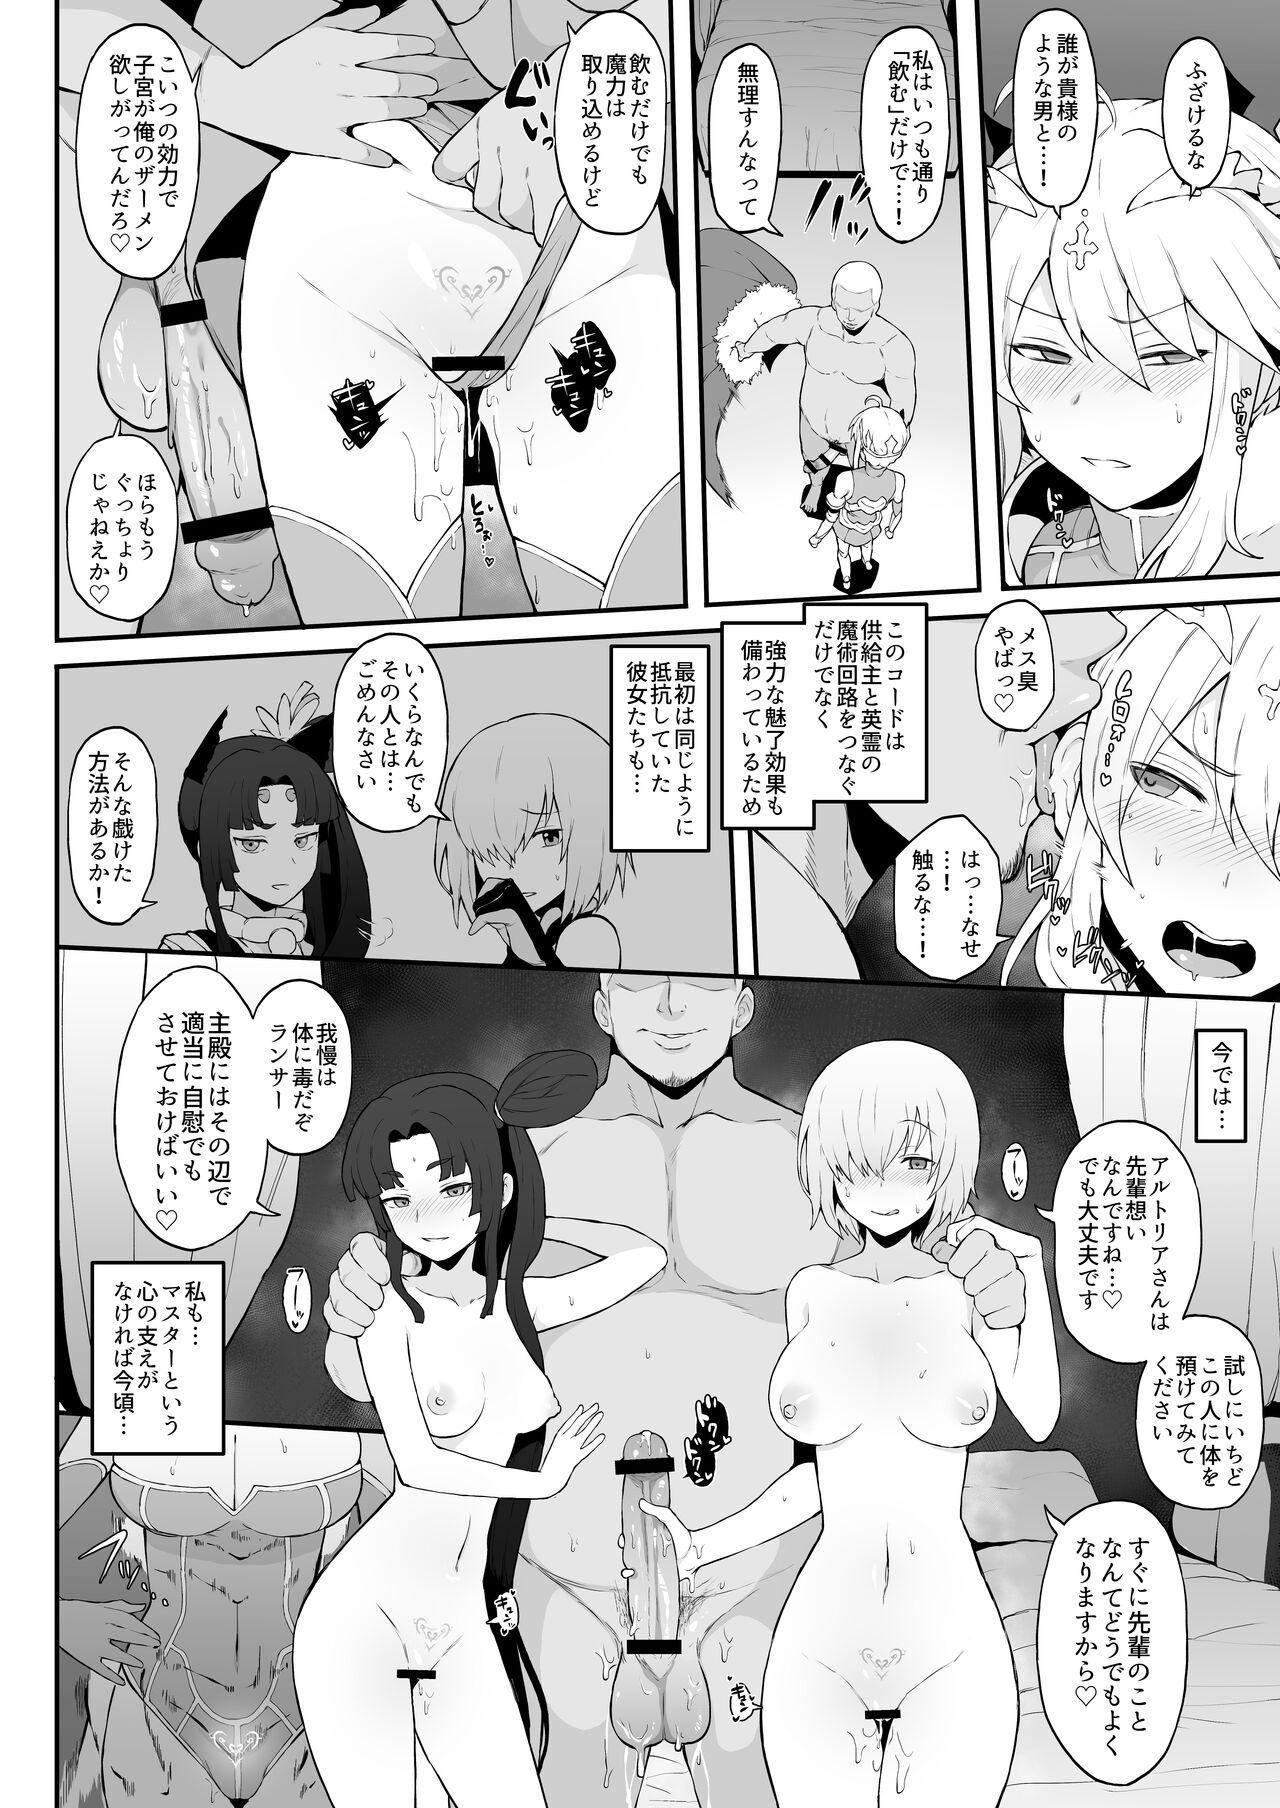 Boyfriend No Title - Fate grand order Longhair - Page 6